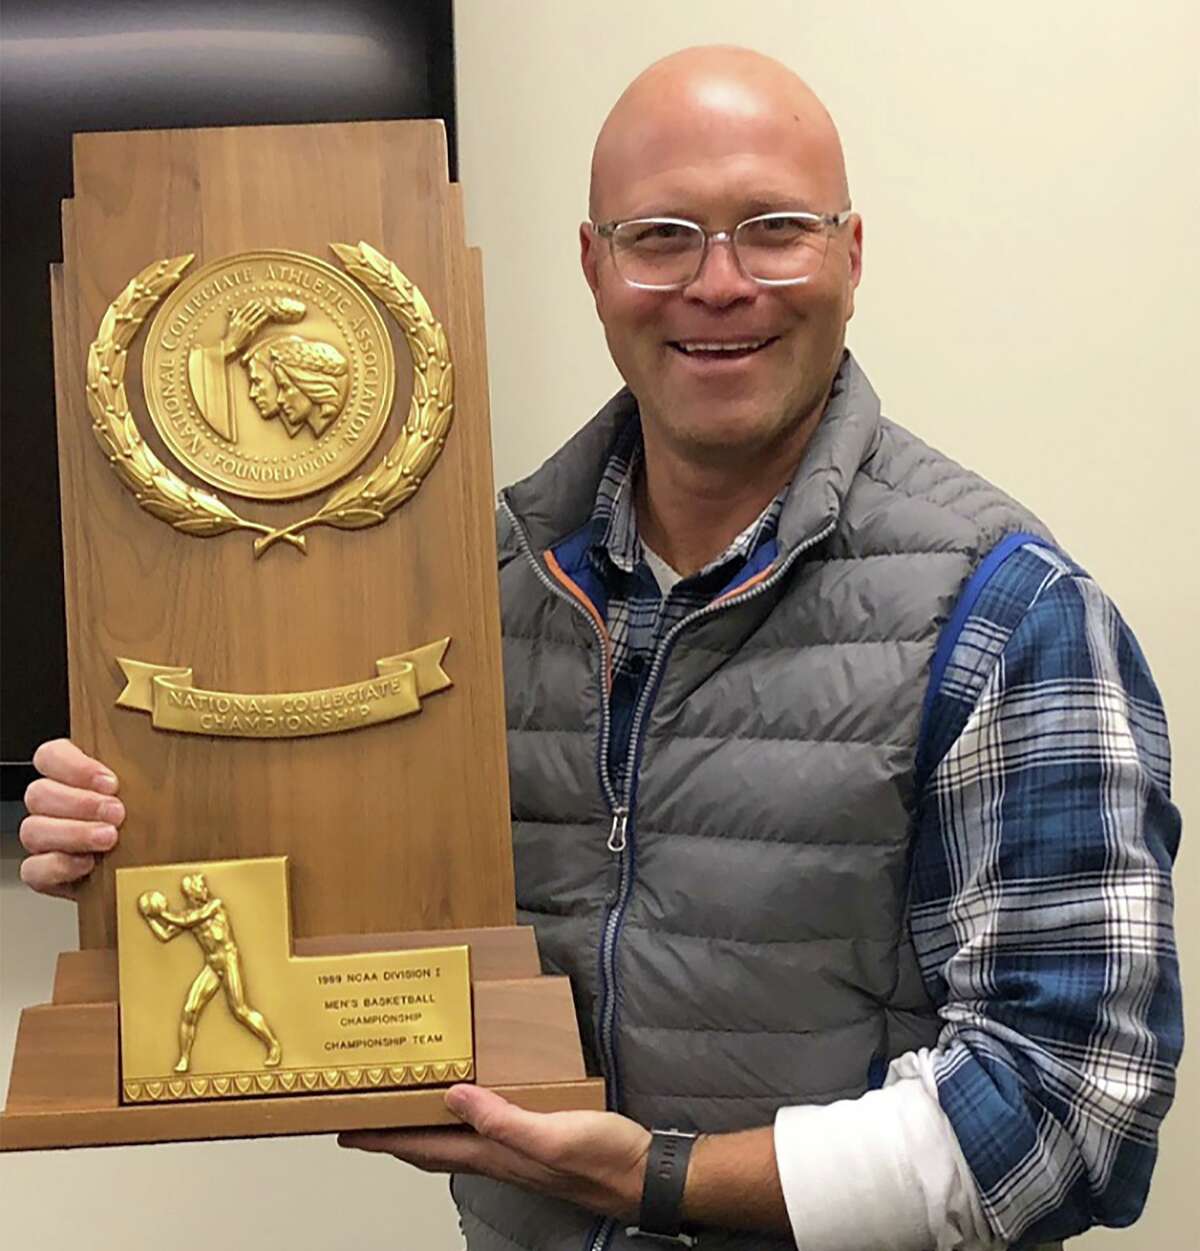 Westport’s Dave Goldshore, shown holding Michigan’s 1989 NCAA Tournament men’s basketball trophy, has been named the new head coach for Staples boys basketball after five years as an assistant for former coach Colin Devine. Goldshore is a Michigan alum.